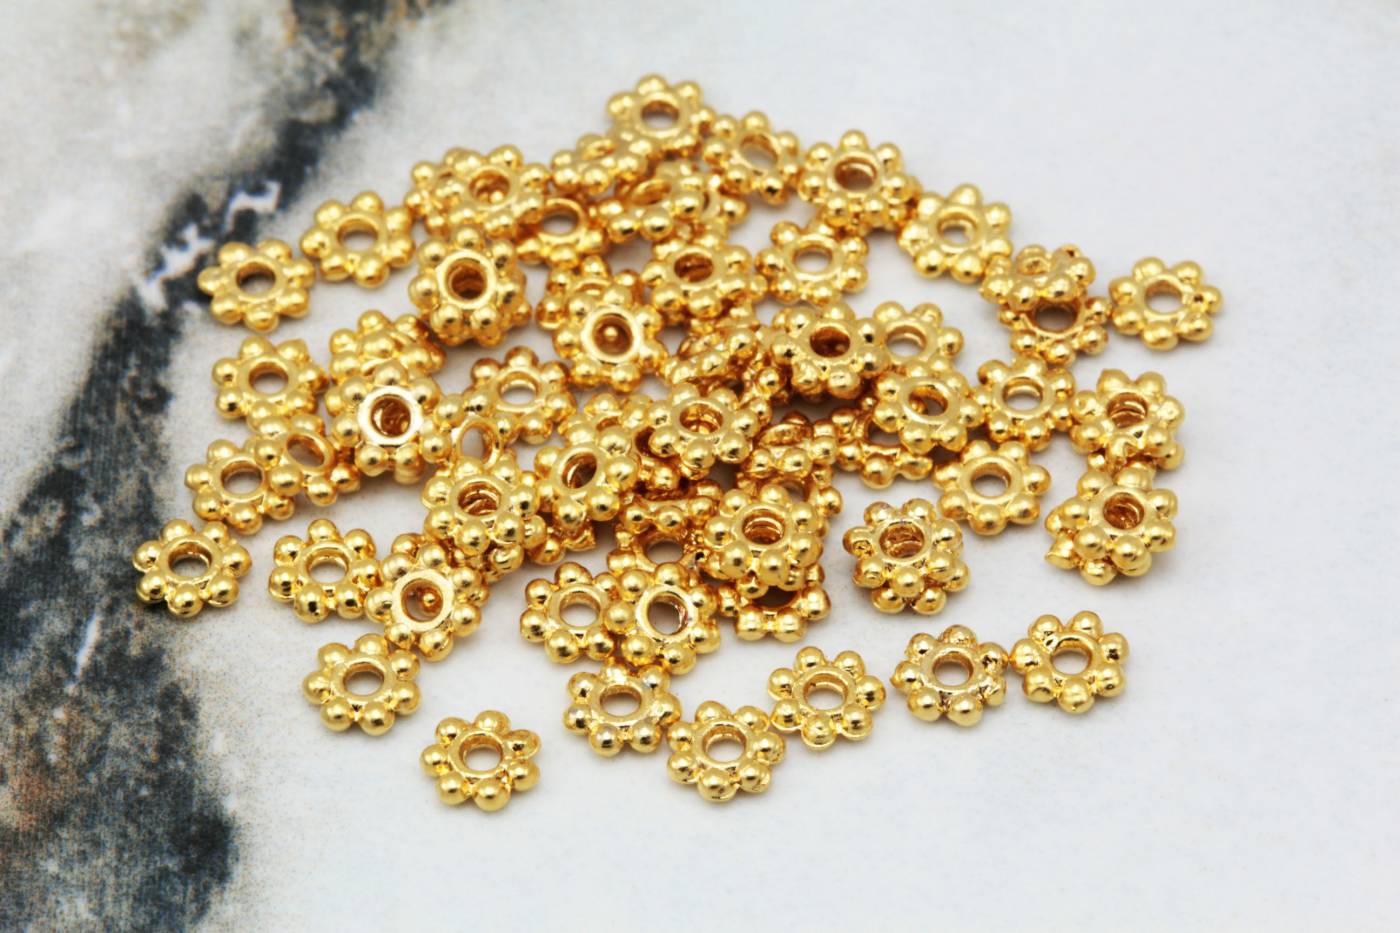 4mm-gold-plate-mini-rondelle-spacer-bead